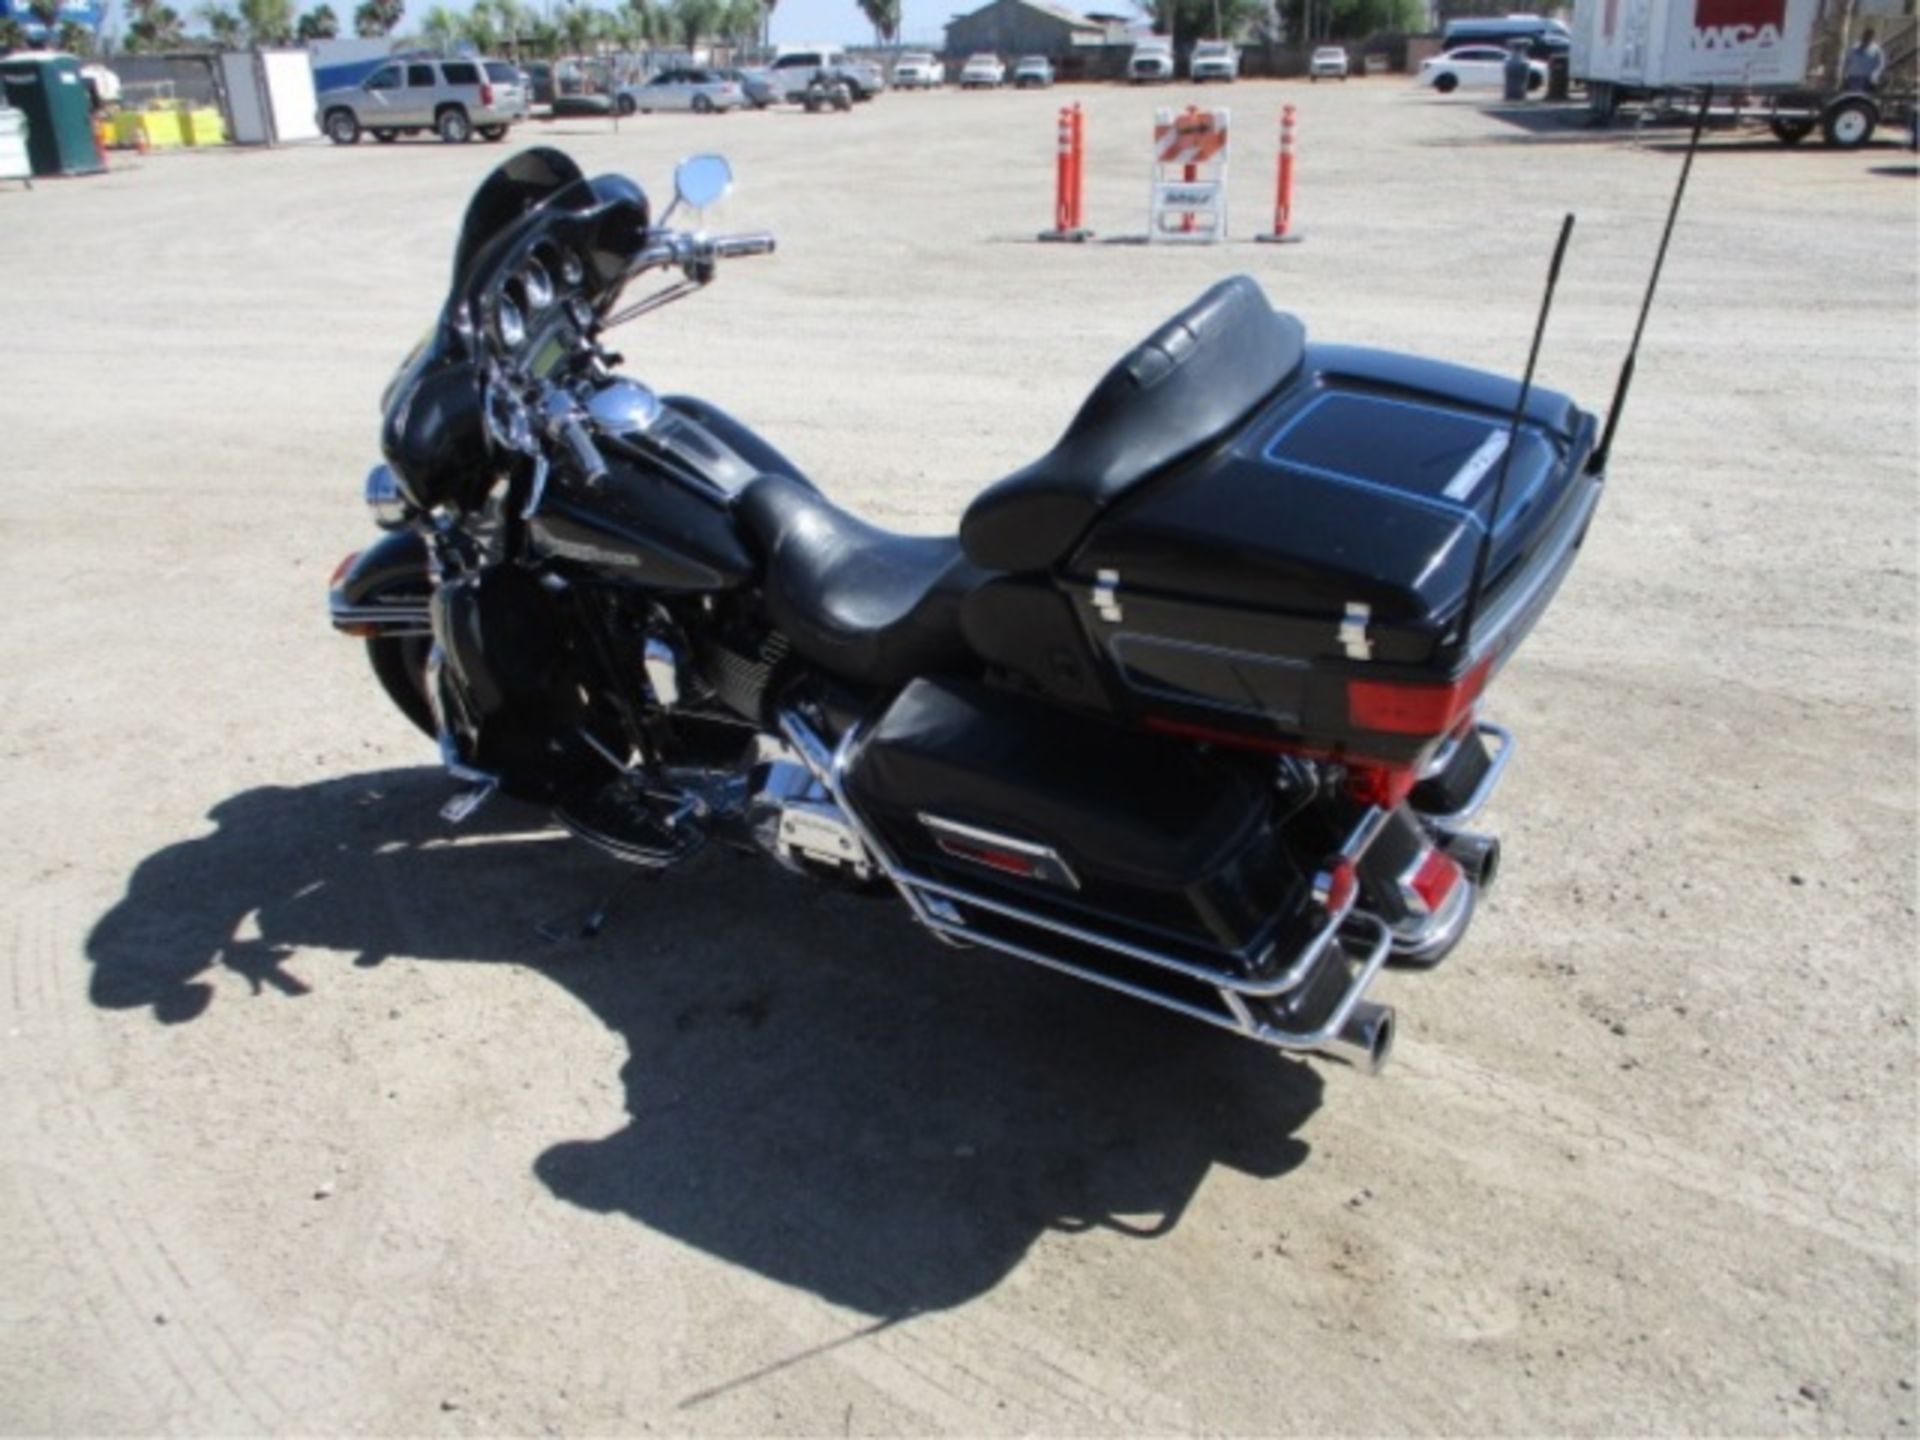 2006 Harley Davidson Electra Glide Motor Cycle, Ultra Classic, 1450cc Gas, External Speakers, - Image 9 of 44